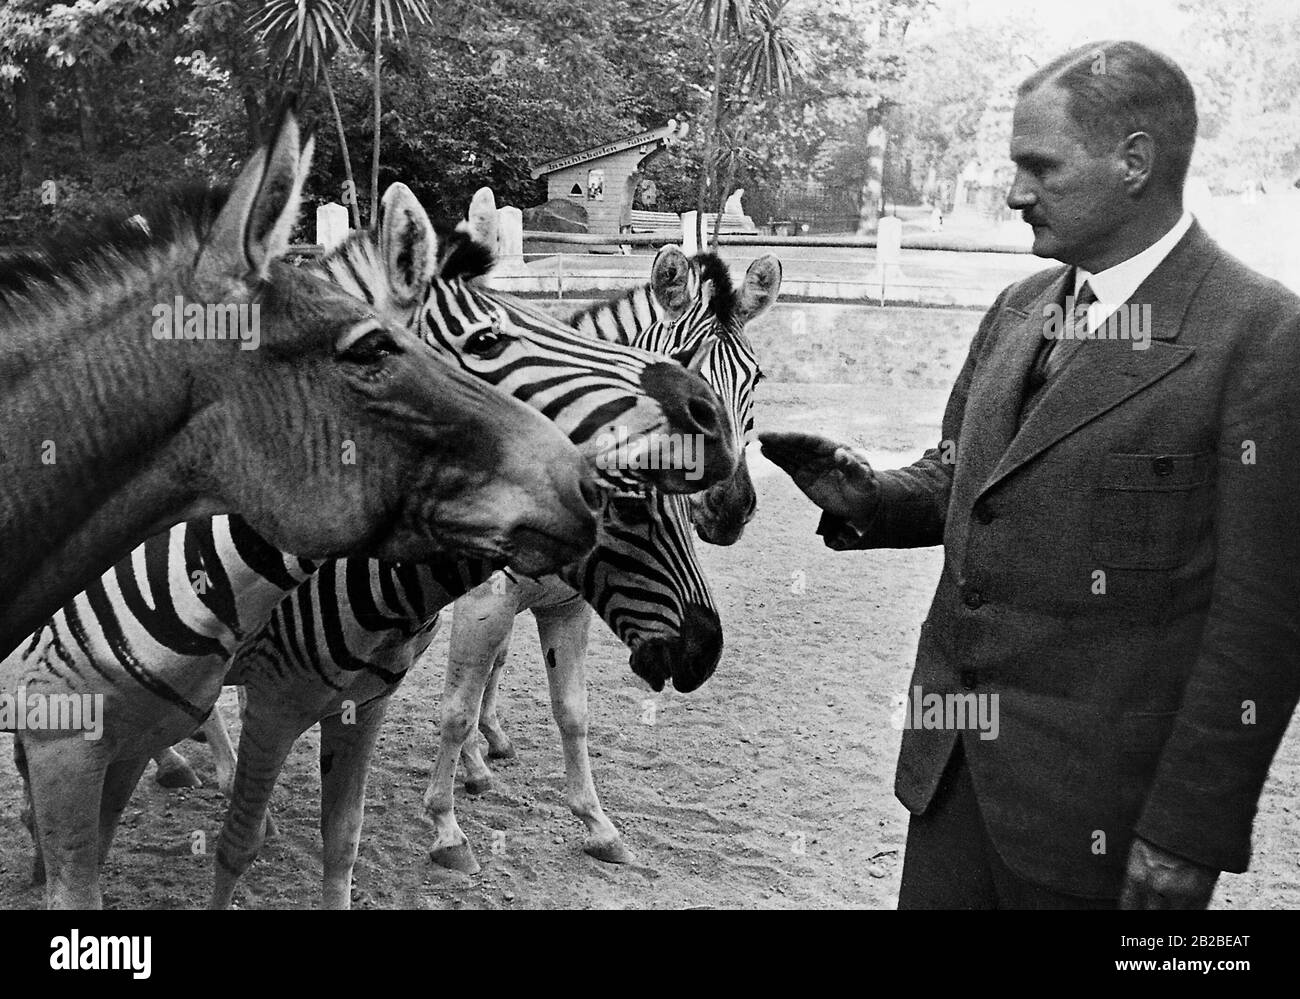 Lutz Heck (1892-1983), a German zoologist. Heck was the director of the Berlin Zoological Garden from 1932 to 1945 (undated photo). Stock Photo